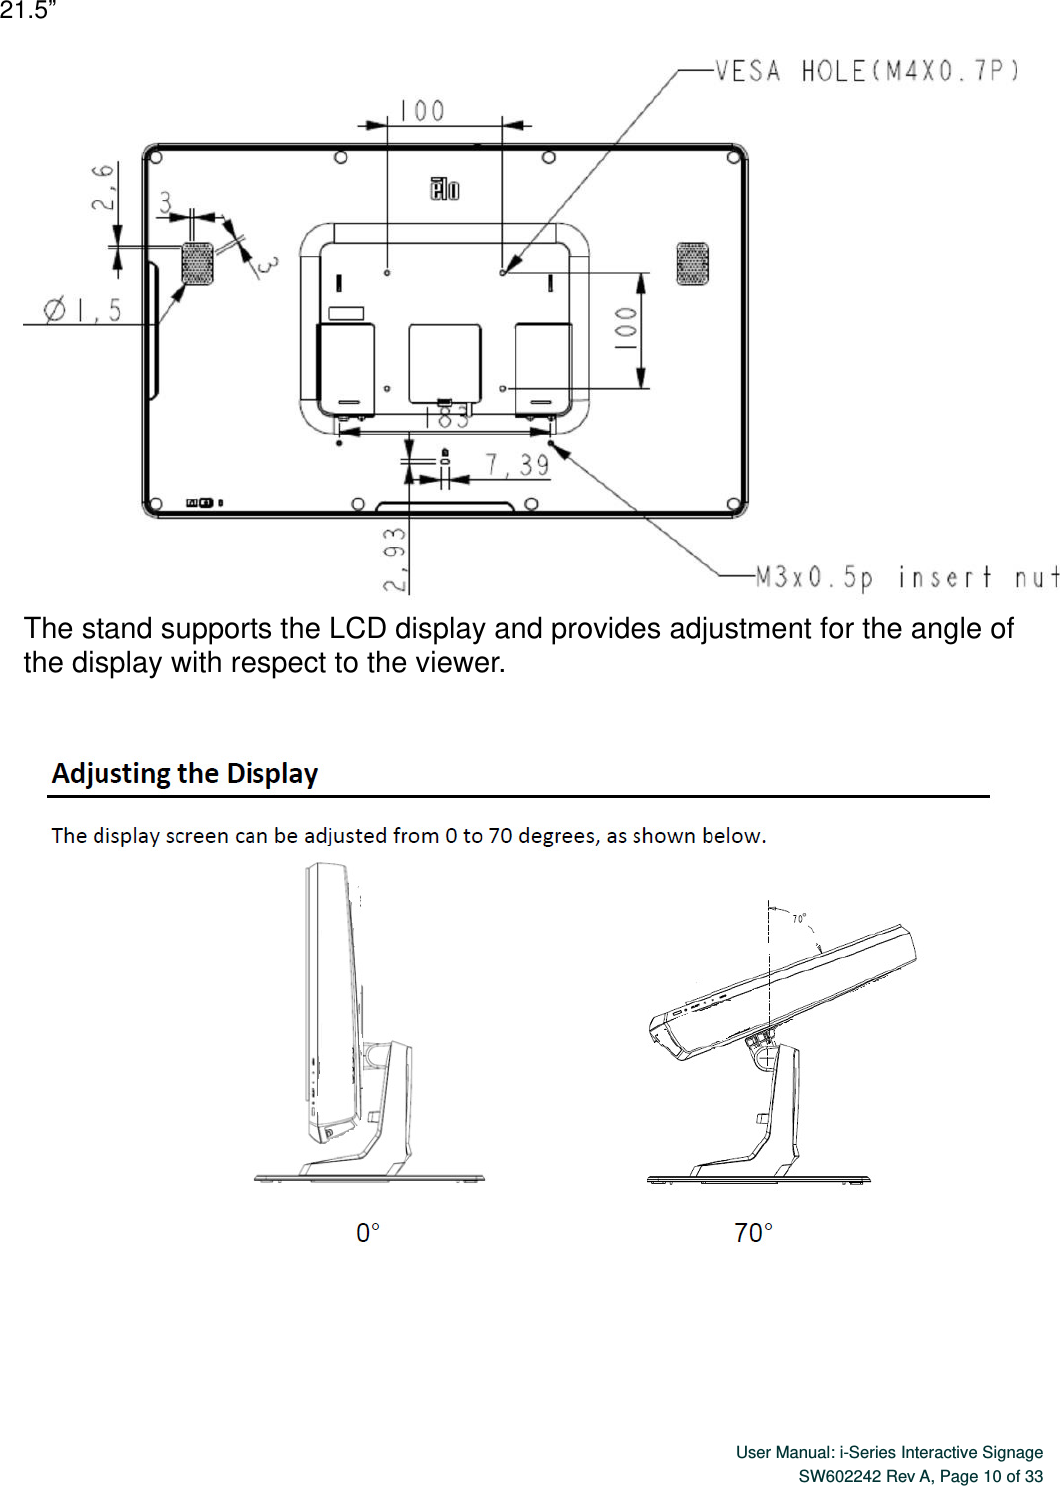  User Manual: i-Series Interactive Signage SW602242 Rev A, Page 10 of 33   21.5”  The stand supports the LCD display and provides adjustment for the angle of the display with respect to the viewer.    